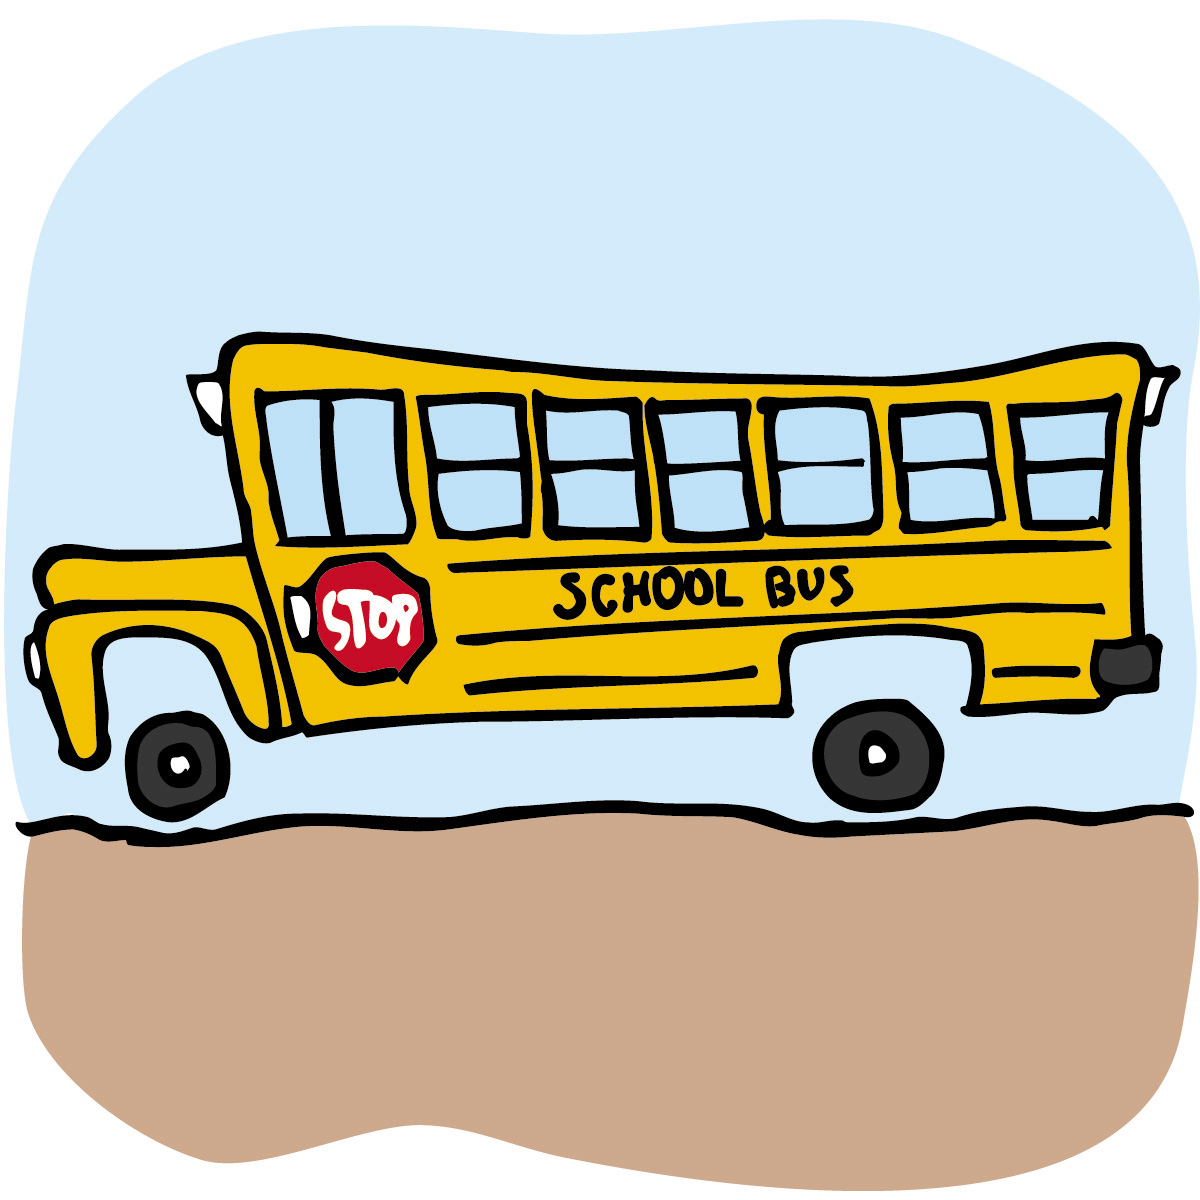 Clip art for school bus free clipart images